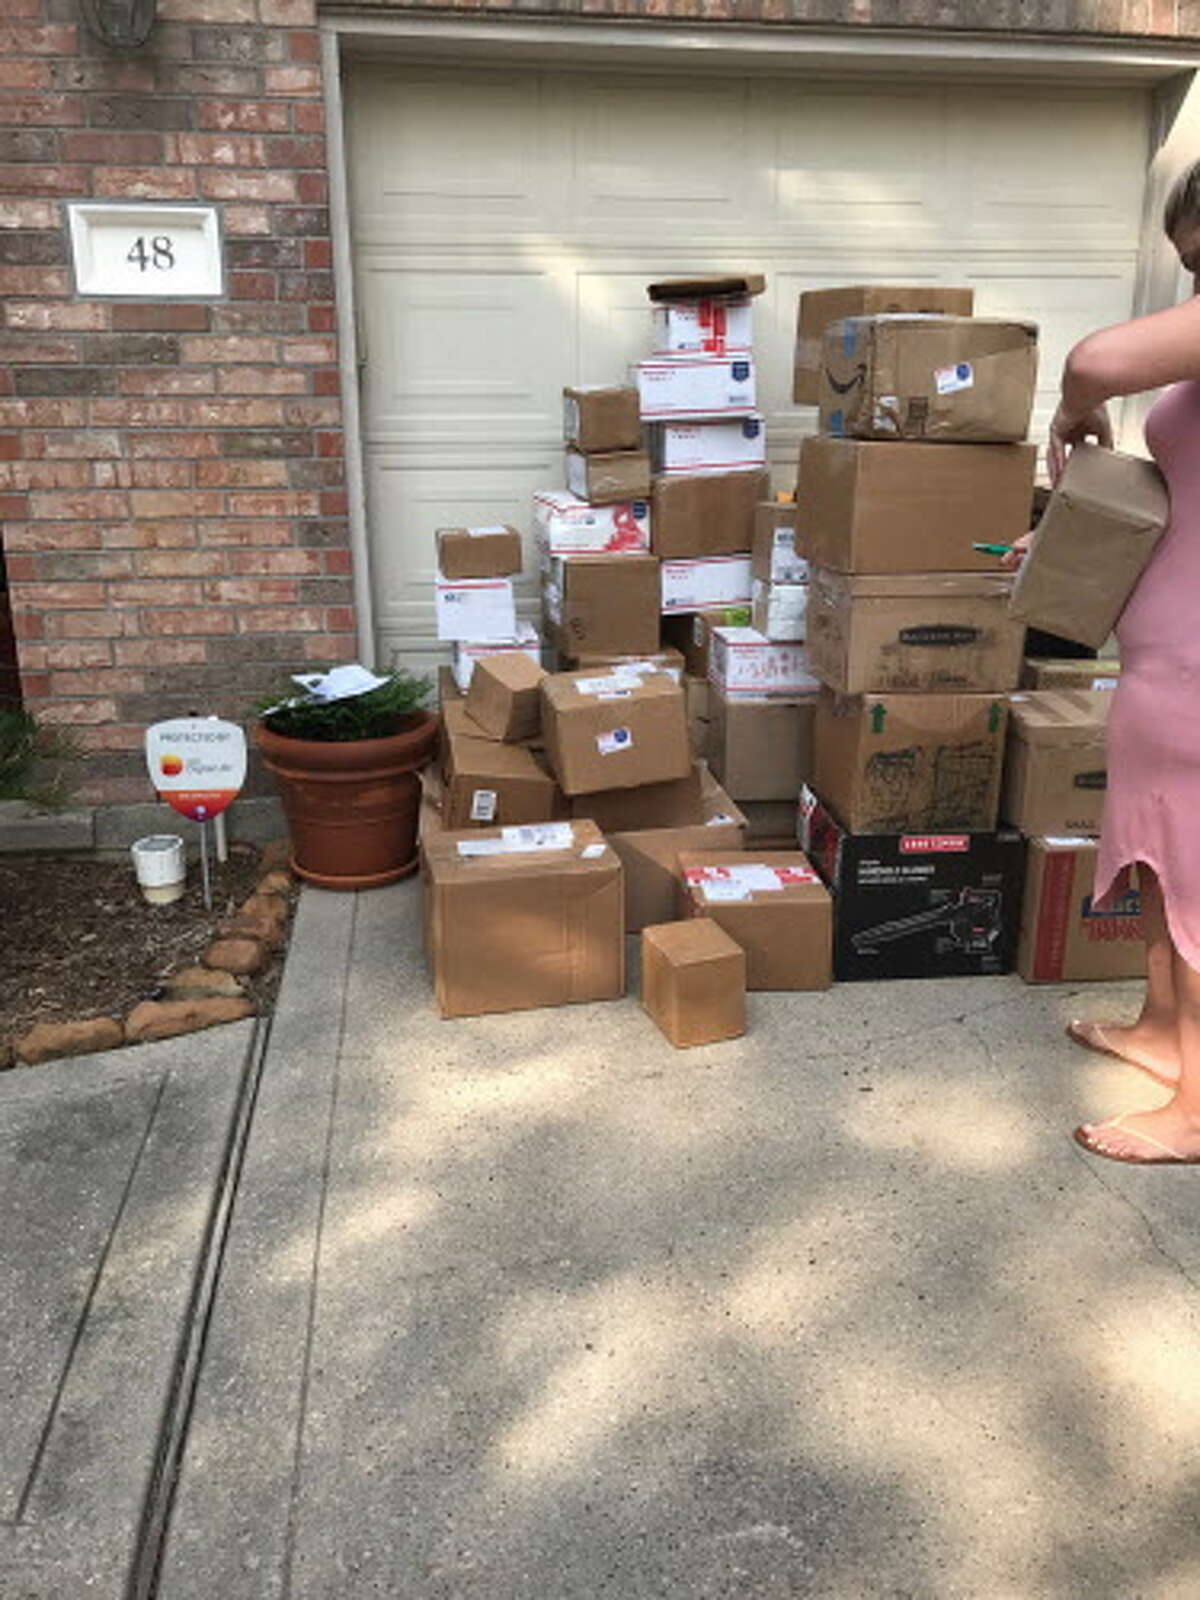 T1 Team Texas, a grassroots effort that began in The Woodlands, collected and donated supplies to families who did not have access to insulin or other items because of Hurricane Harvey.